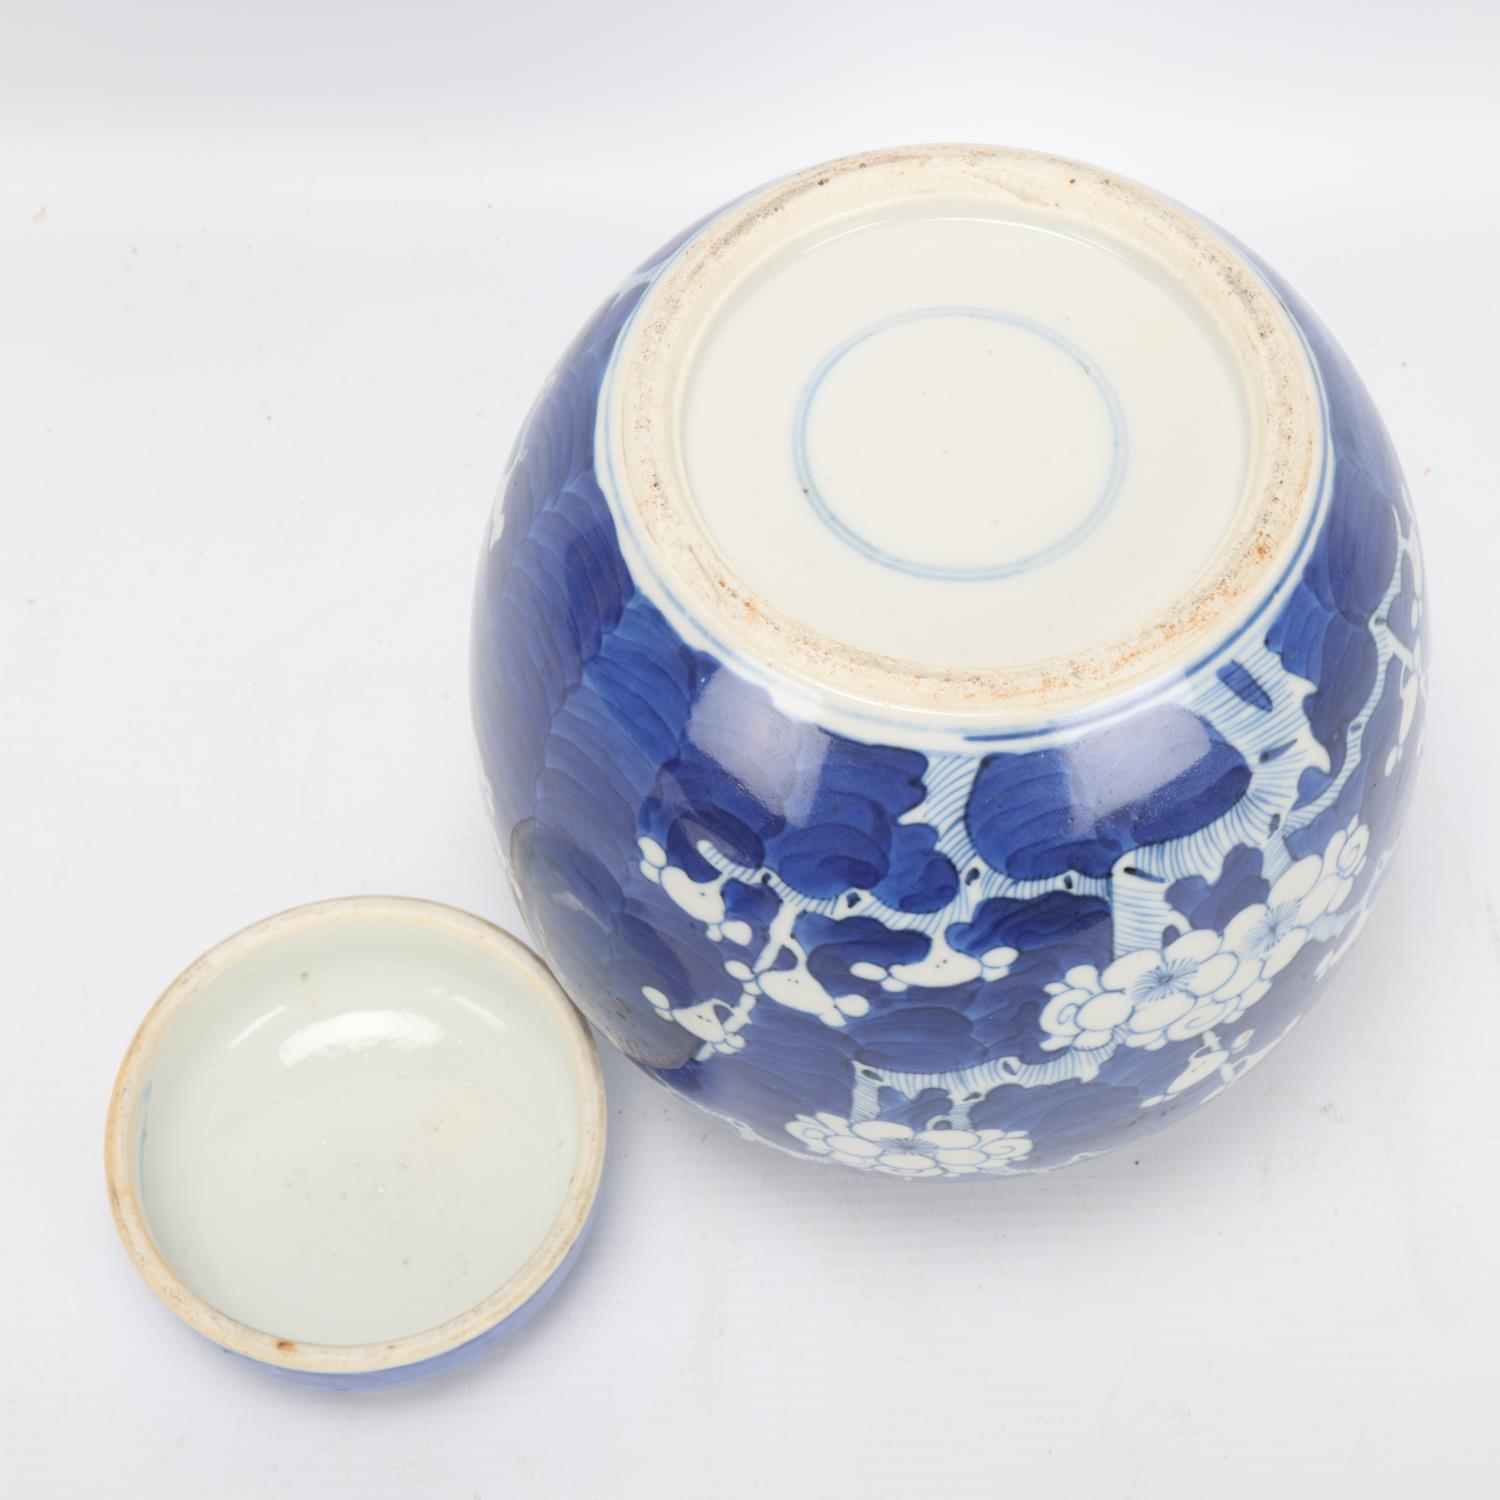 A Chinese blue and white porcelain ginger jar and cover, on original carved wood stand, overall - Image 2 of 3